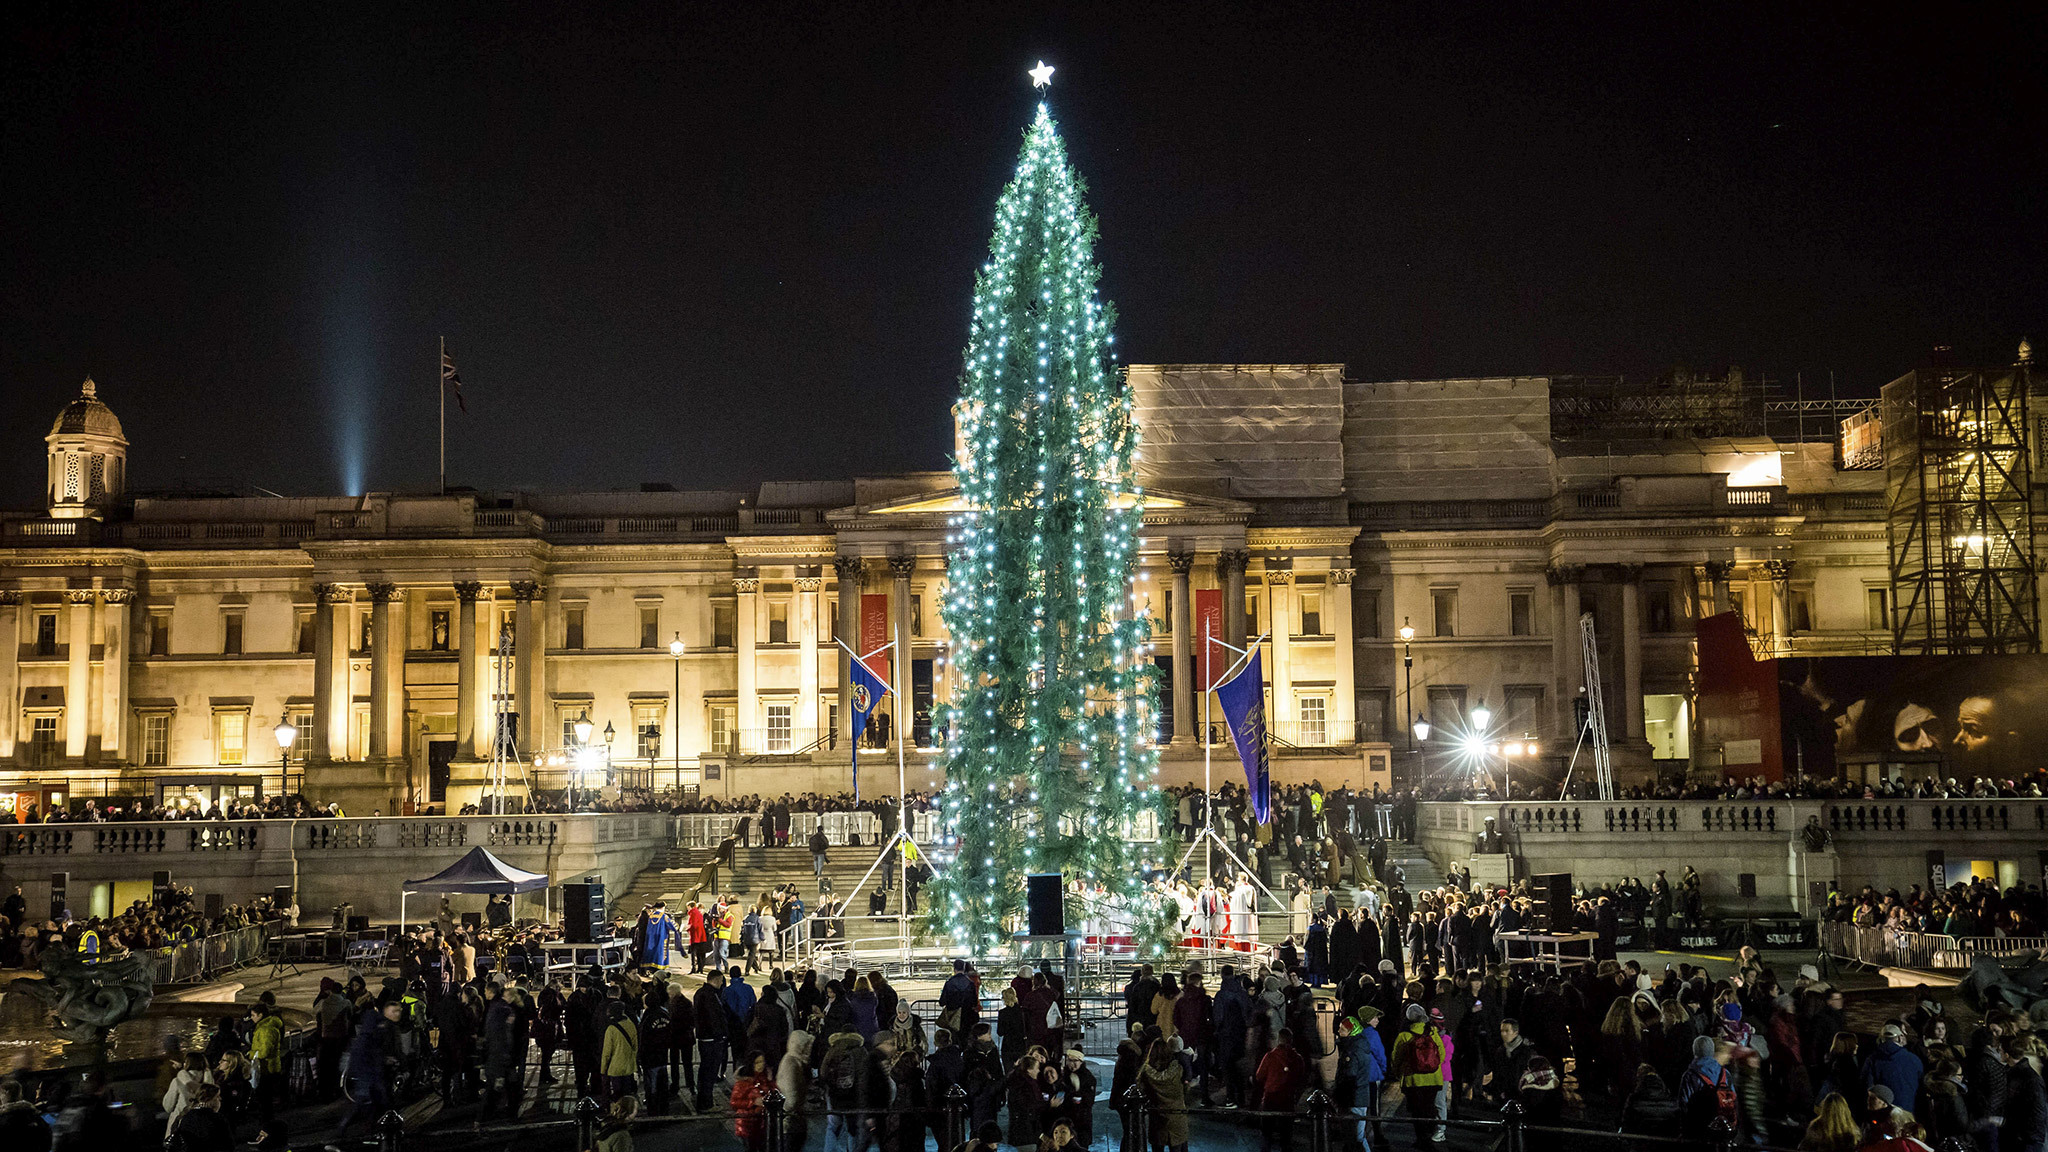 Trafalgar Square's massive Christmas tree is on its way to London right now